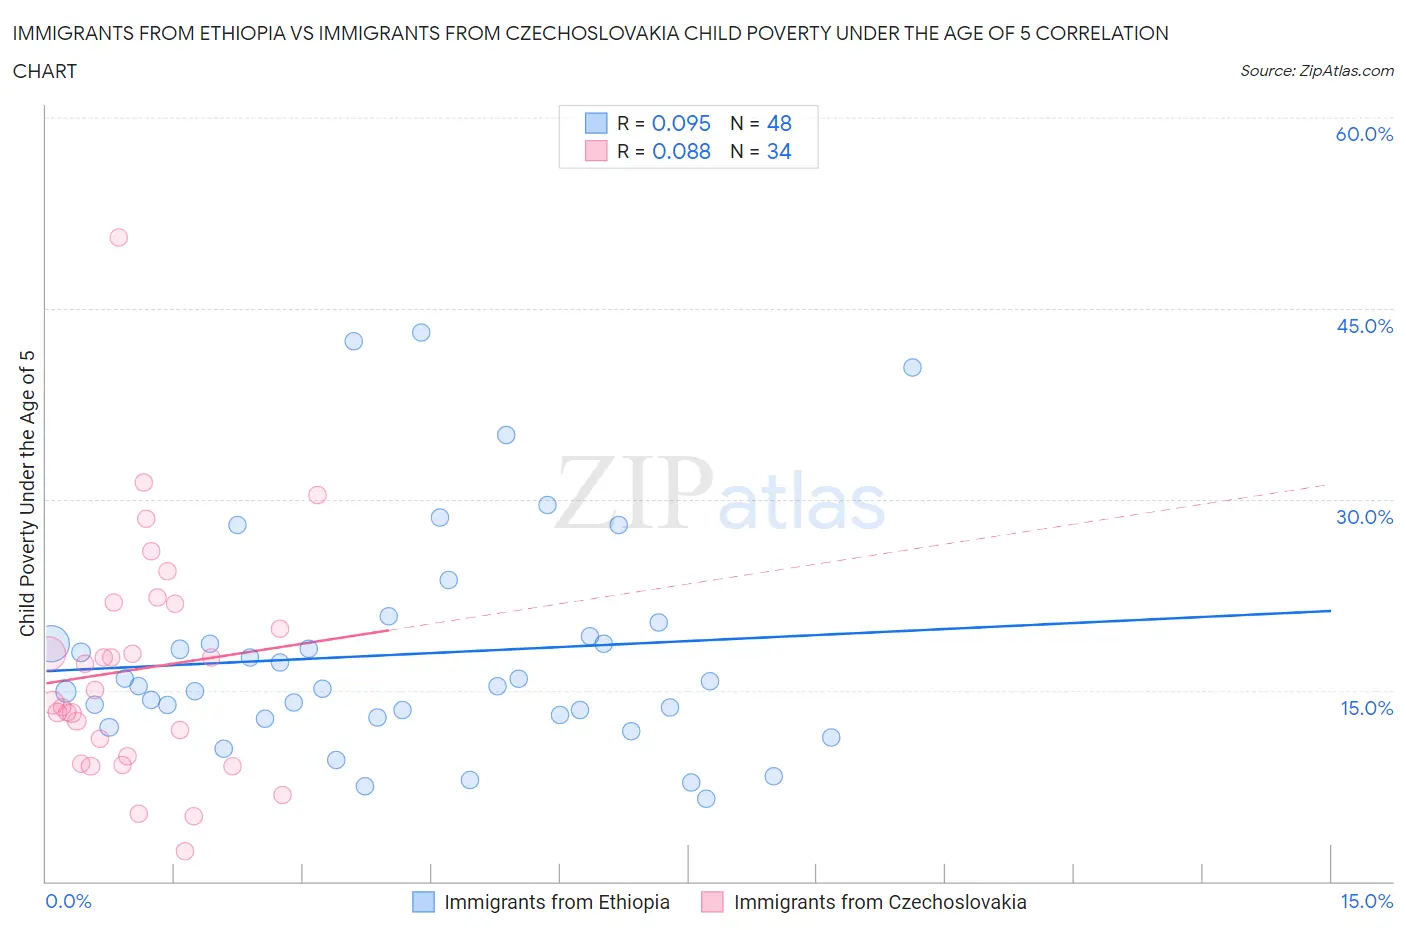 Immigrants from Ethiopia vs Immigrants from Czechoslovakia Child Poverty Under the Age of 5